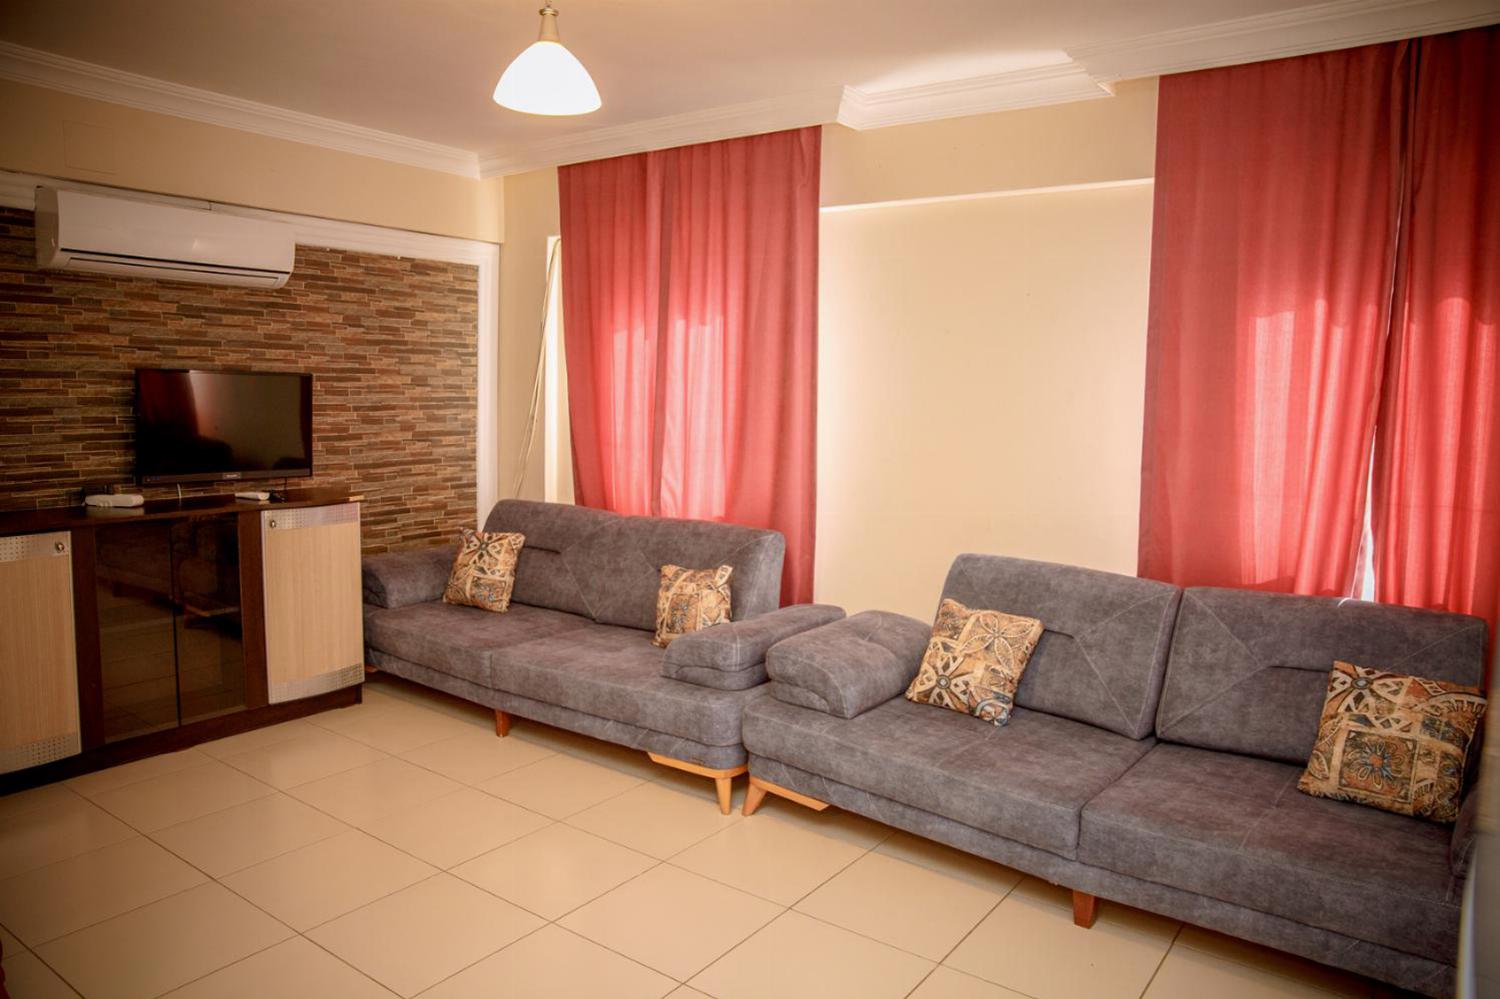 Open-plan living room with sofas, dining area, kitchen, A/C, WiFi internet, satellite TV